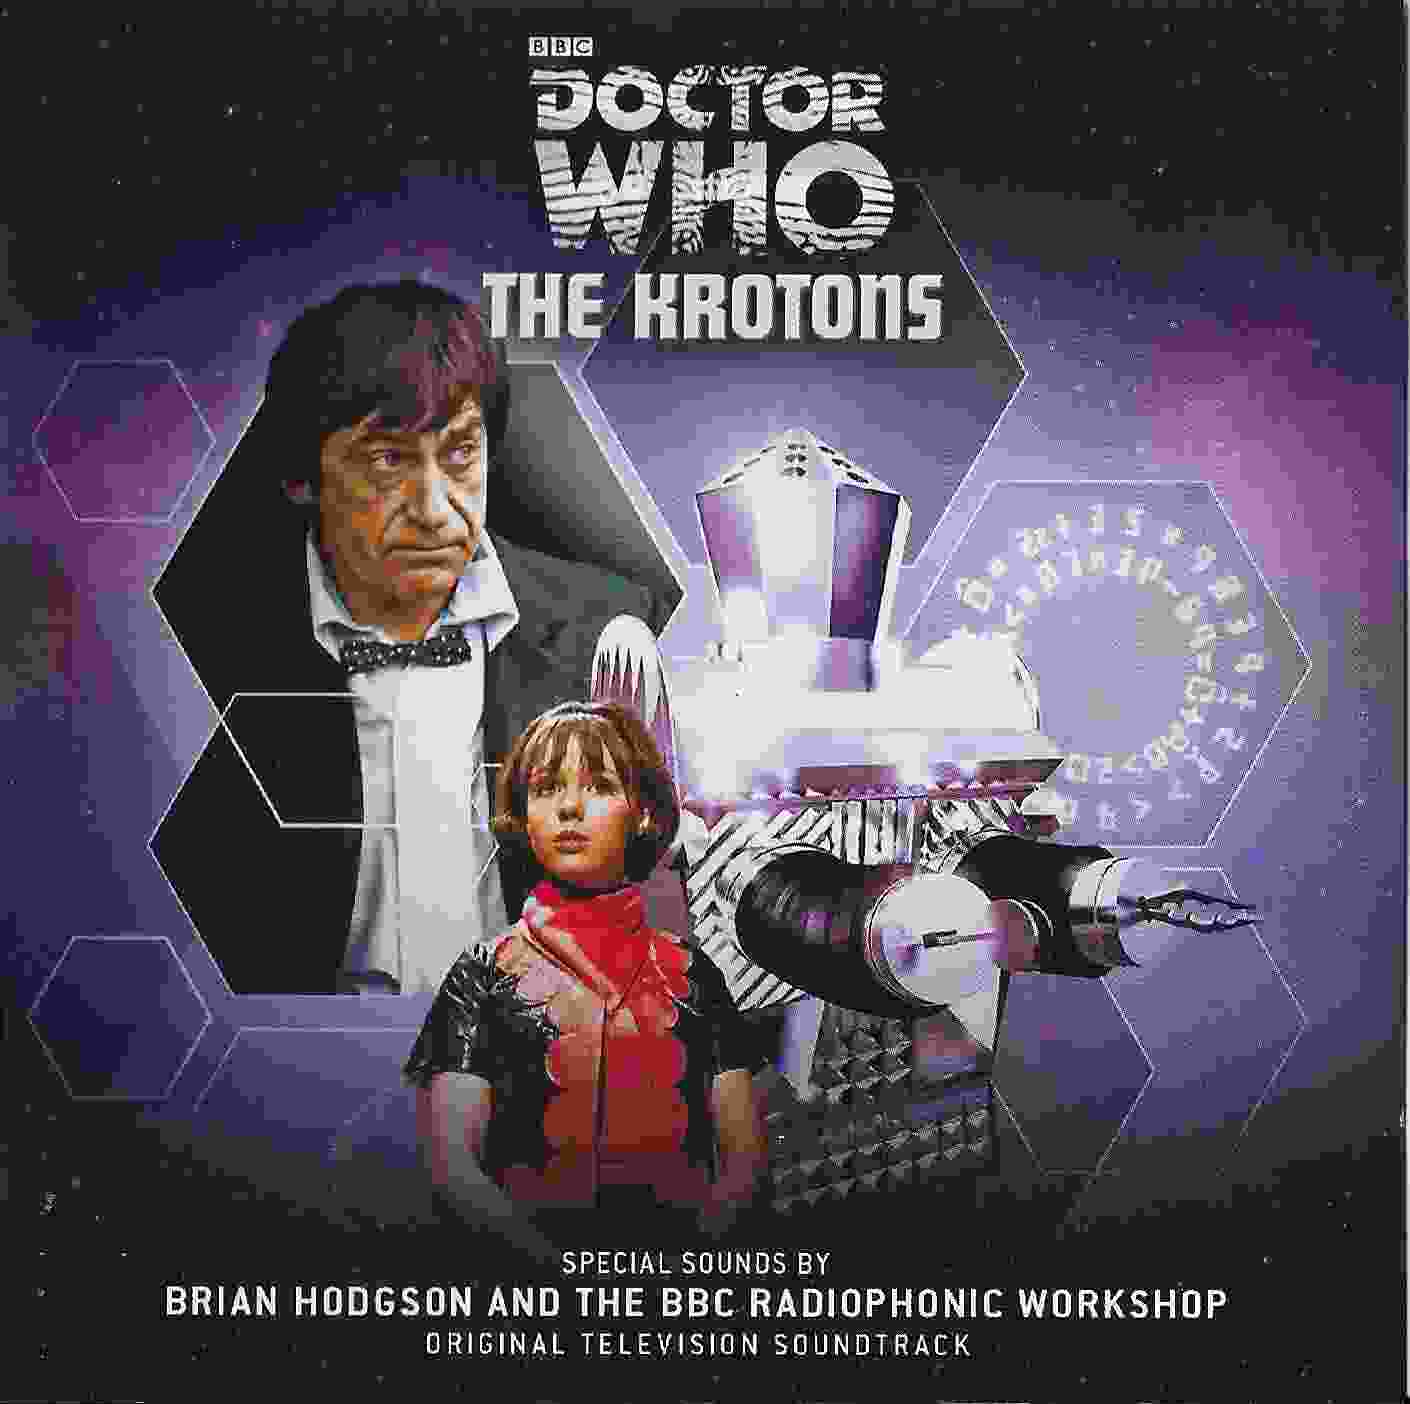 Picture of SILCD 1371 Doctor Who - The Krotons by artist Brian Hodgson and the BBC Radiophonic Workshop from the BBC records and Tapes library